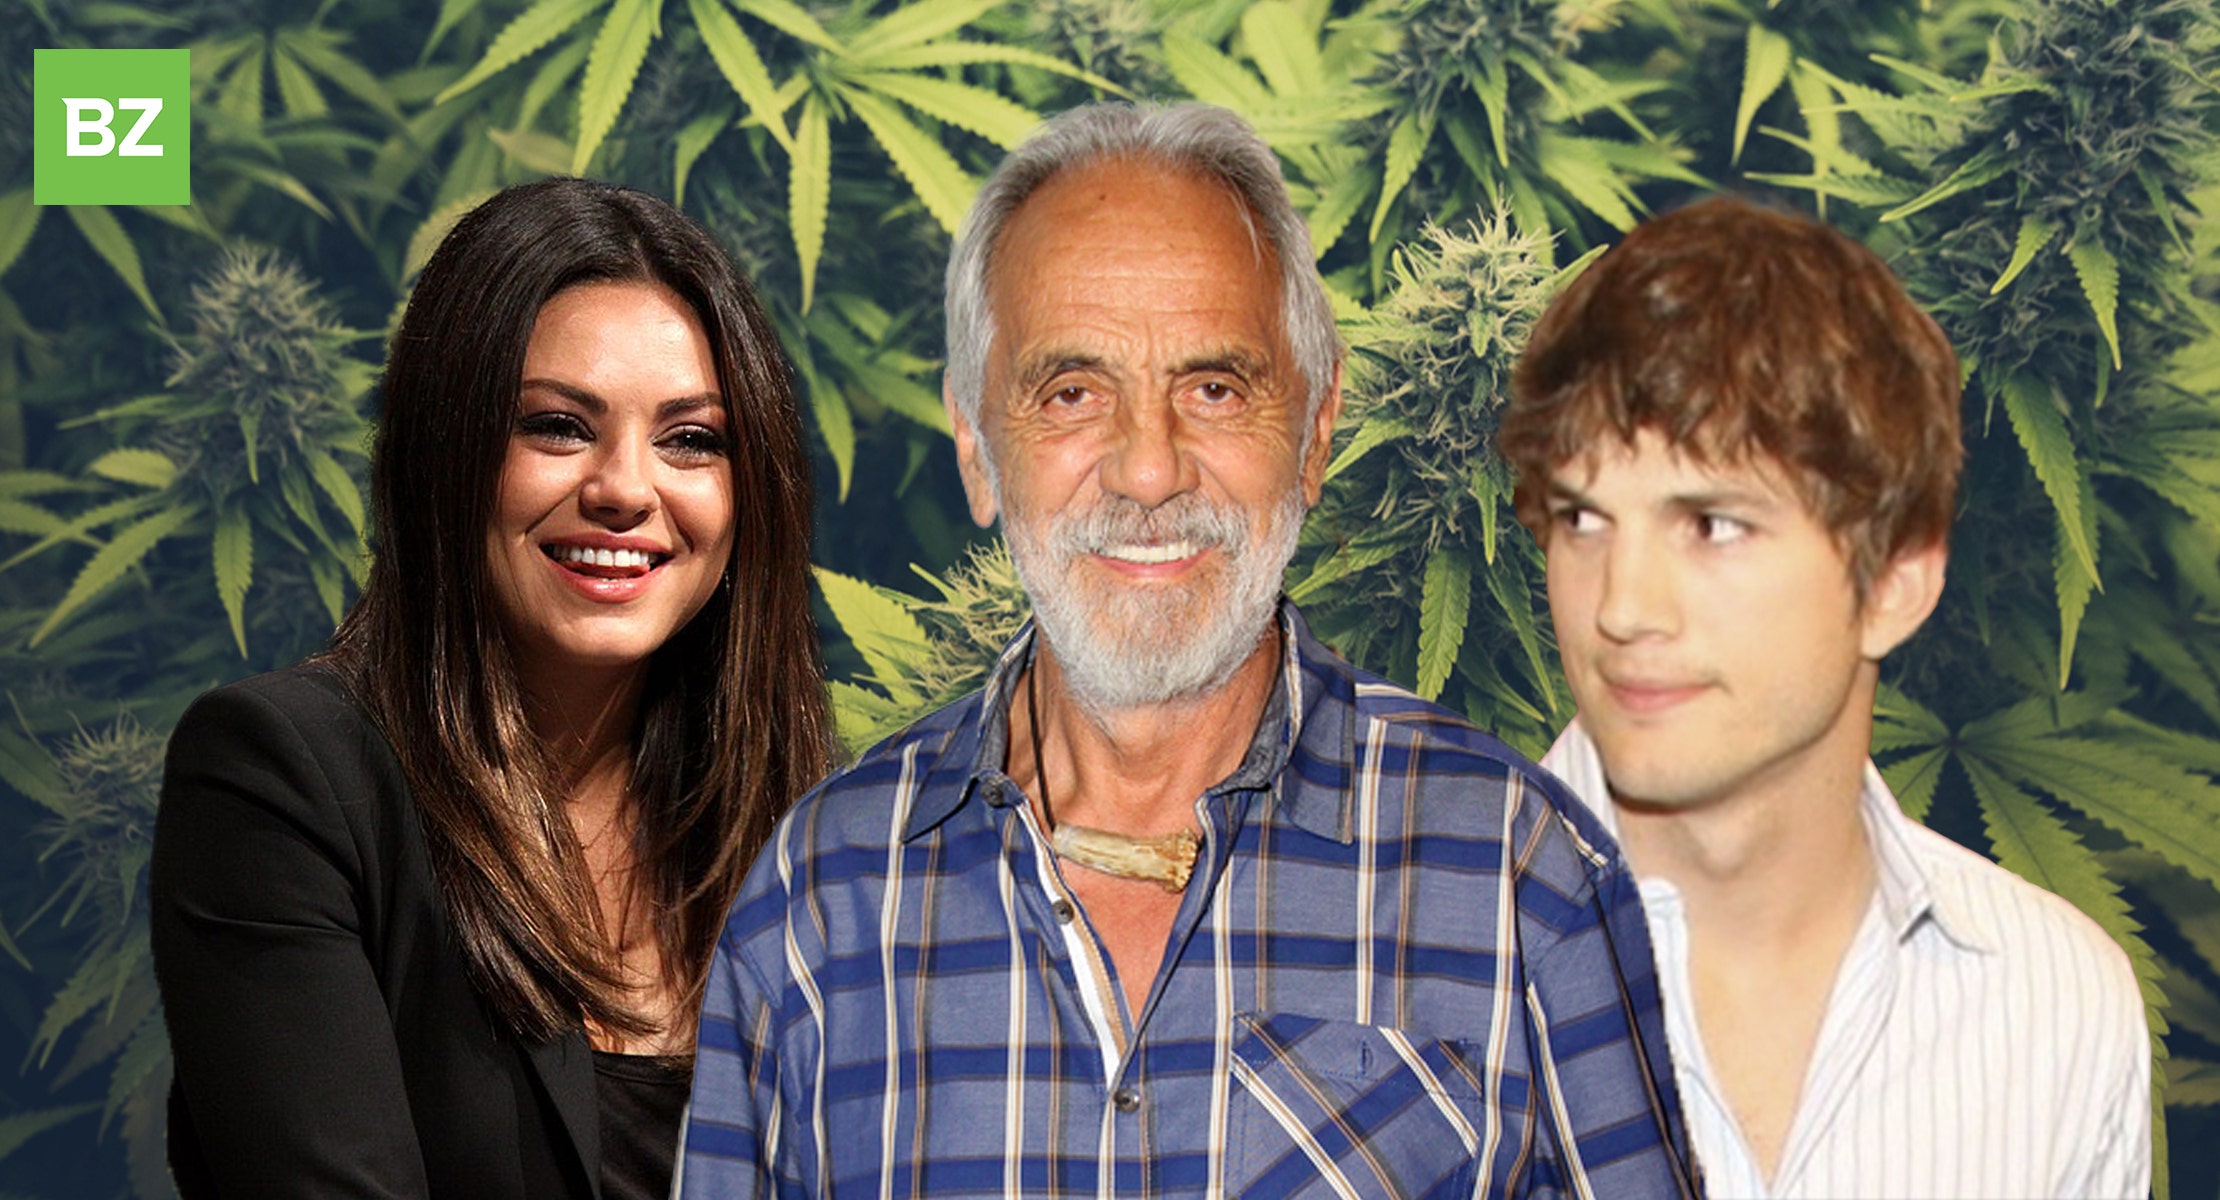 Tommy Chong & Friends Light Up The Screen In 'That 70's Show' Sequel: Are Ashton Kutcher, Mila Kunis And Topher Grace Stoners Too?